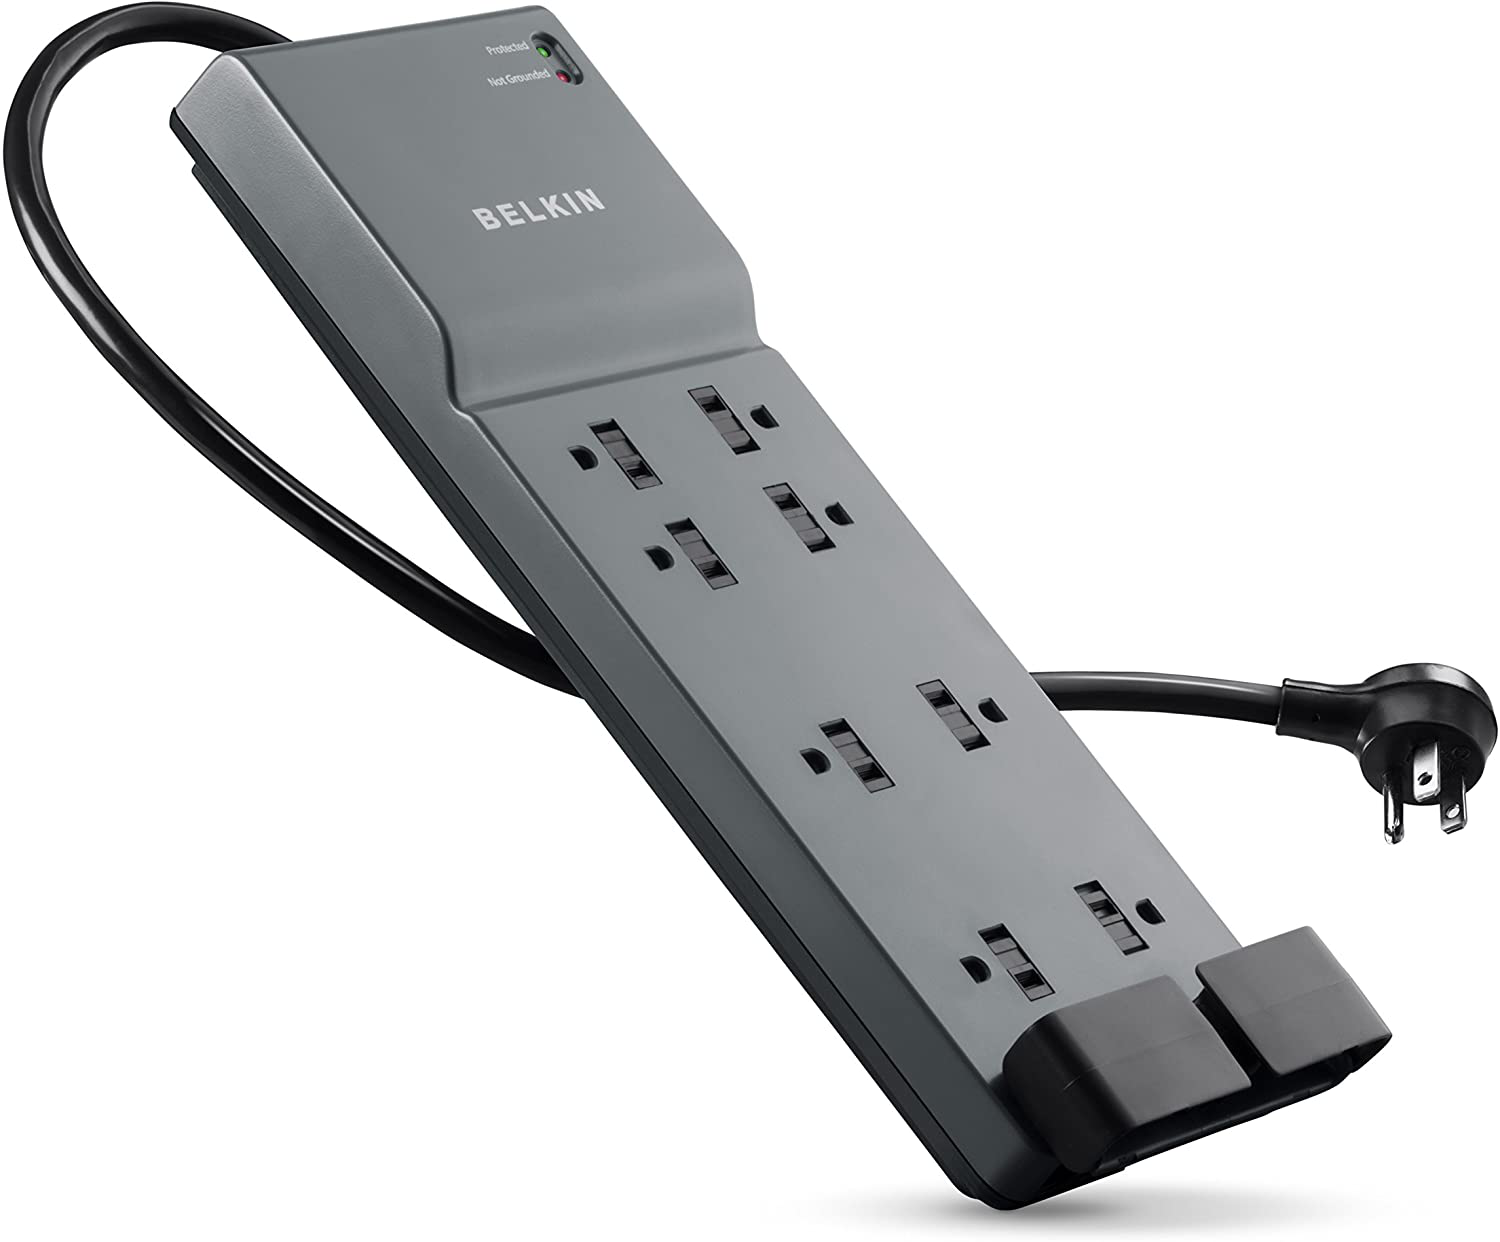 Belkin Power Strip Surge Protector Long Flat Plug Heavy Duty Extension Cord for Home, Office, Travel, Computer Desktop, Laptop & Phone Charging Brick (3,940 Joules)